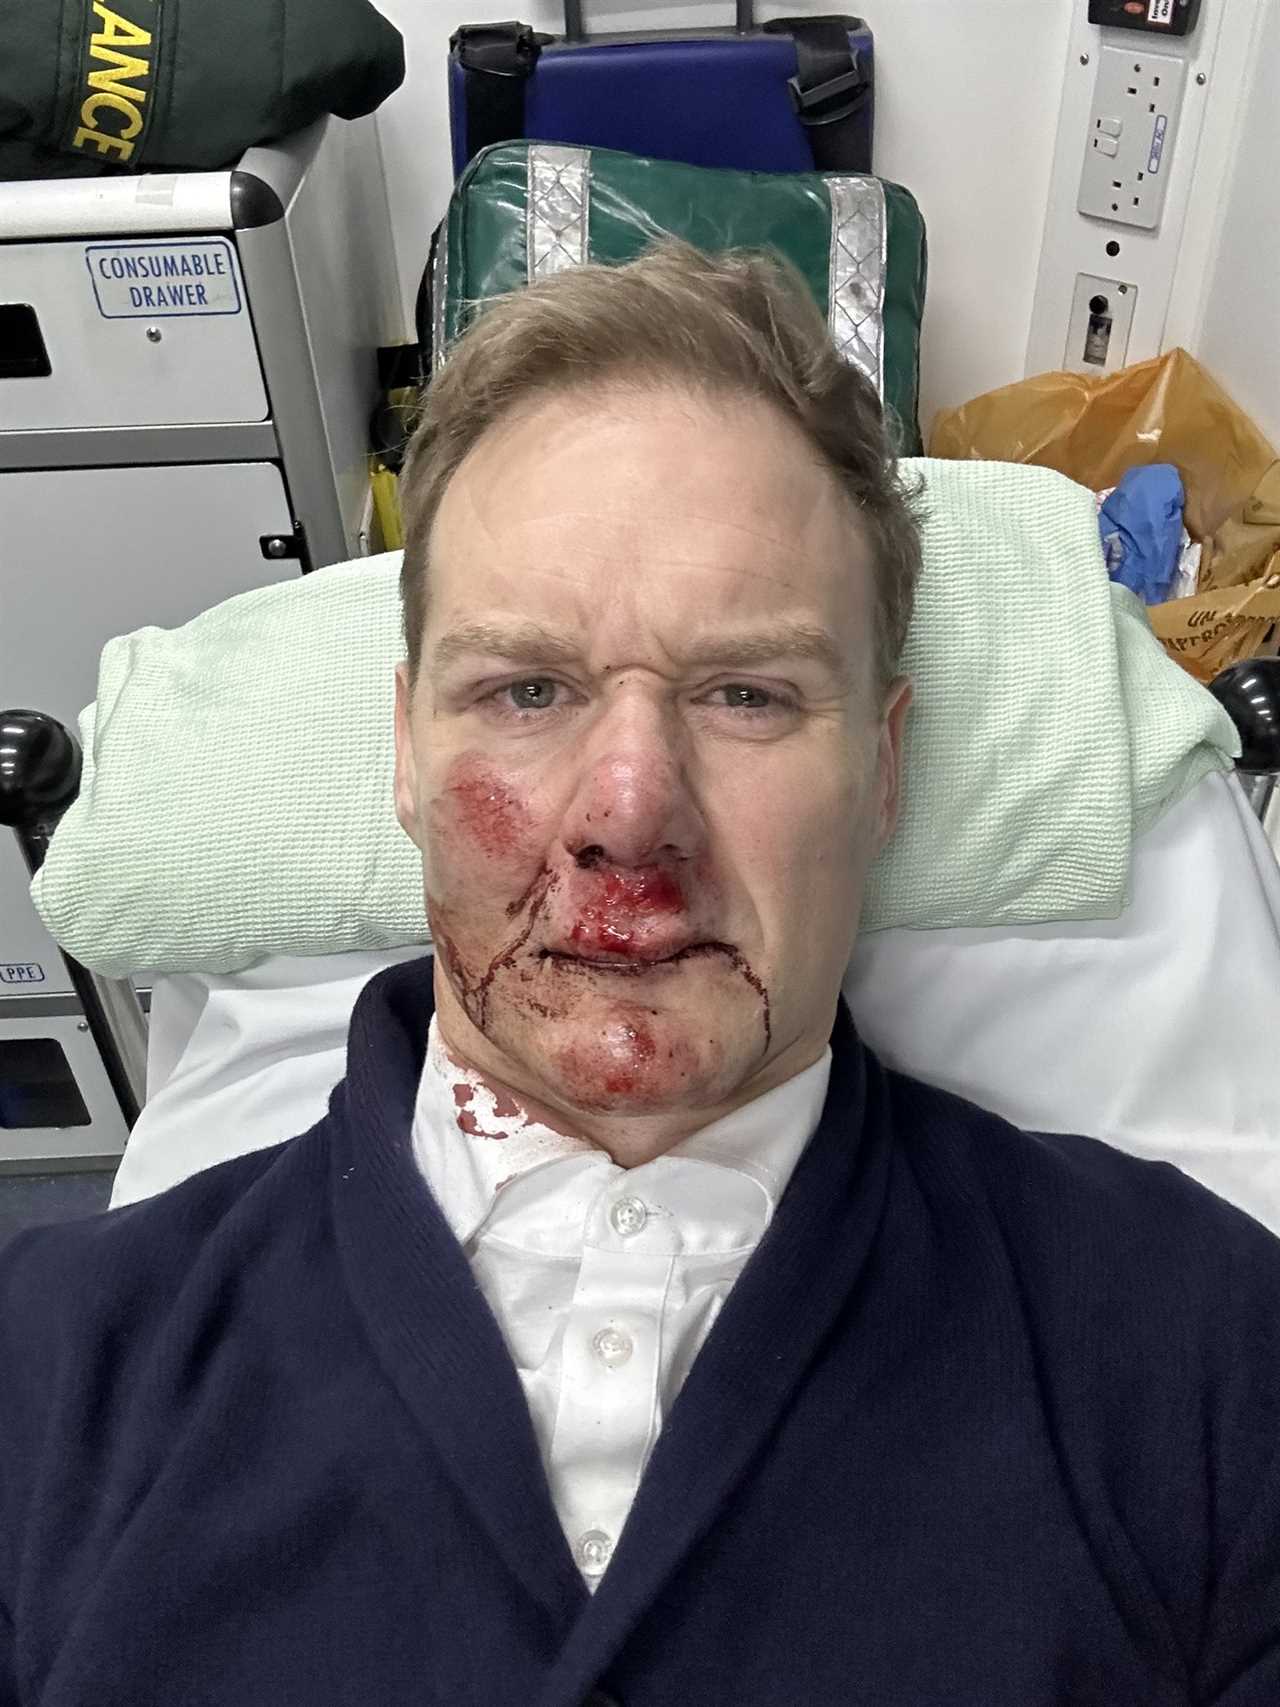 Dan Walker reveals he can’t use his left hand after being knocked out when he was hit by car while cycling